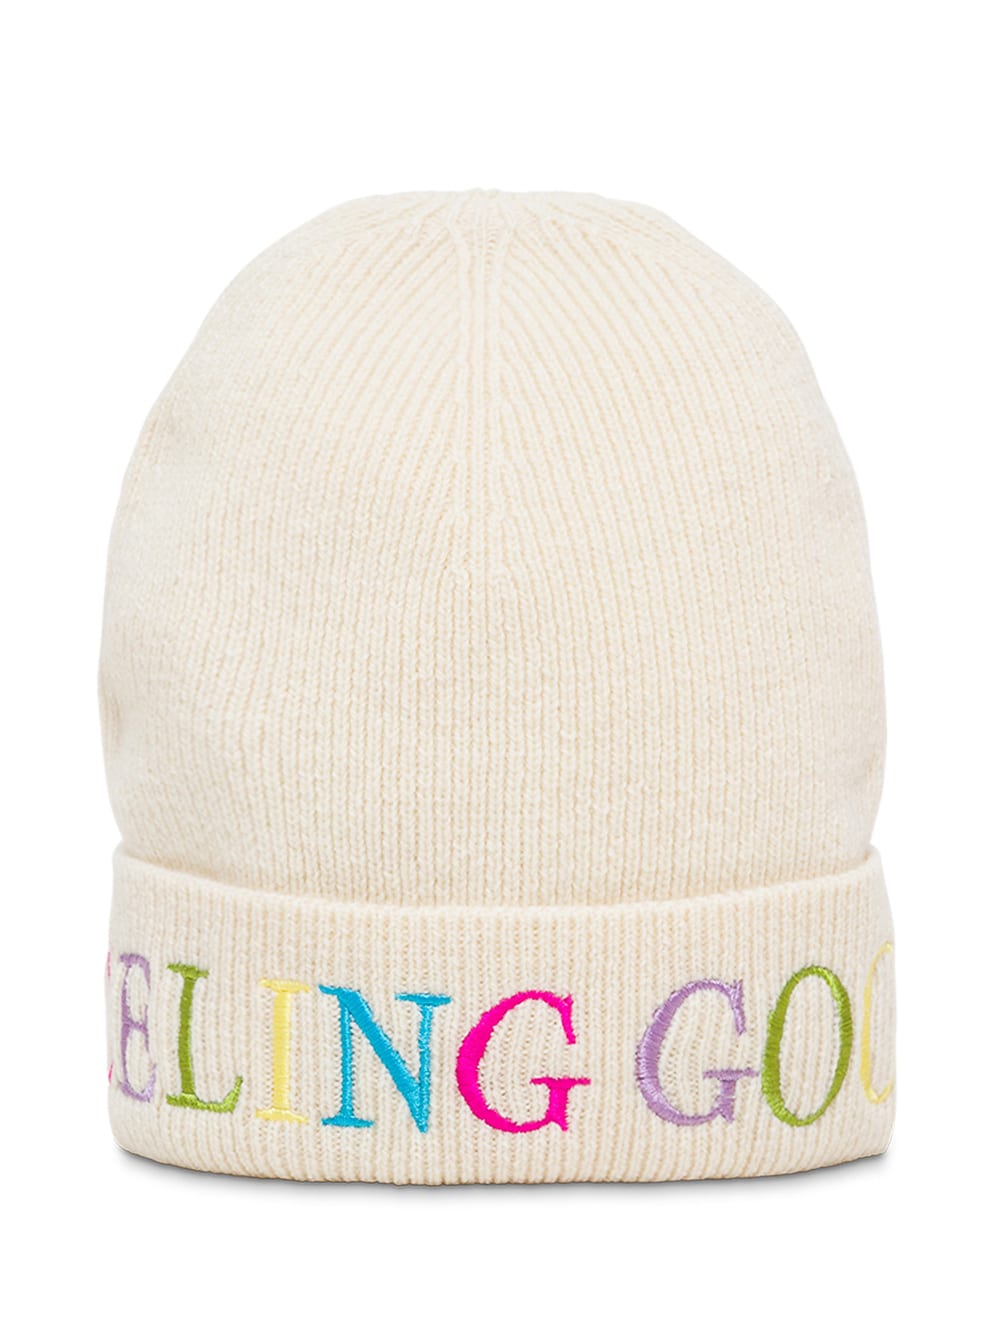 IRENEISGOOD White Wool And Cashmere Hat With Multicolor Logo